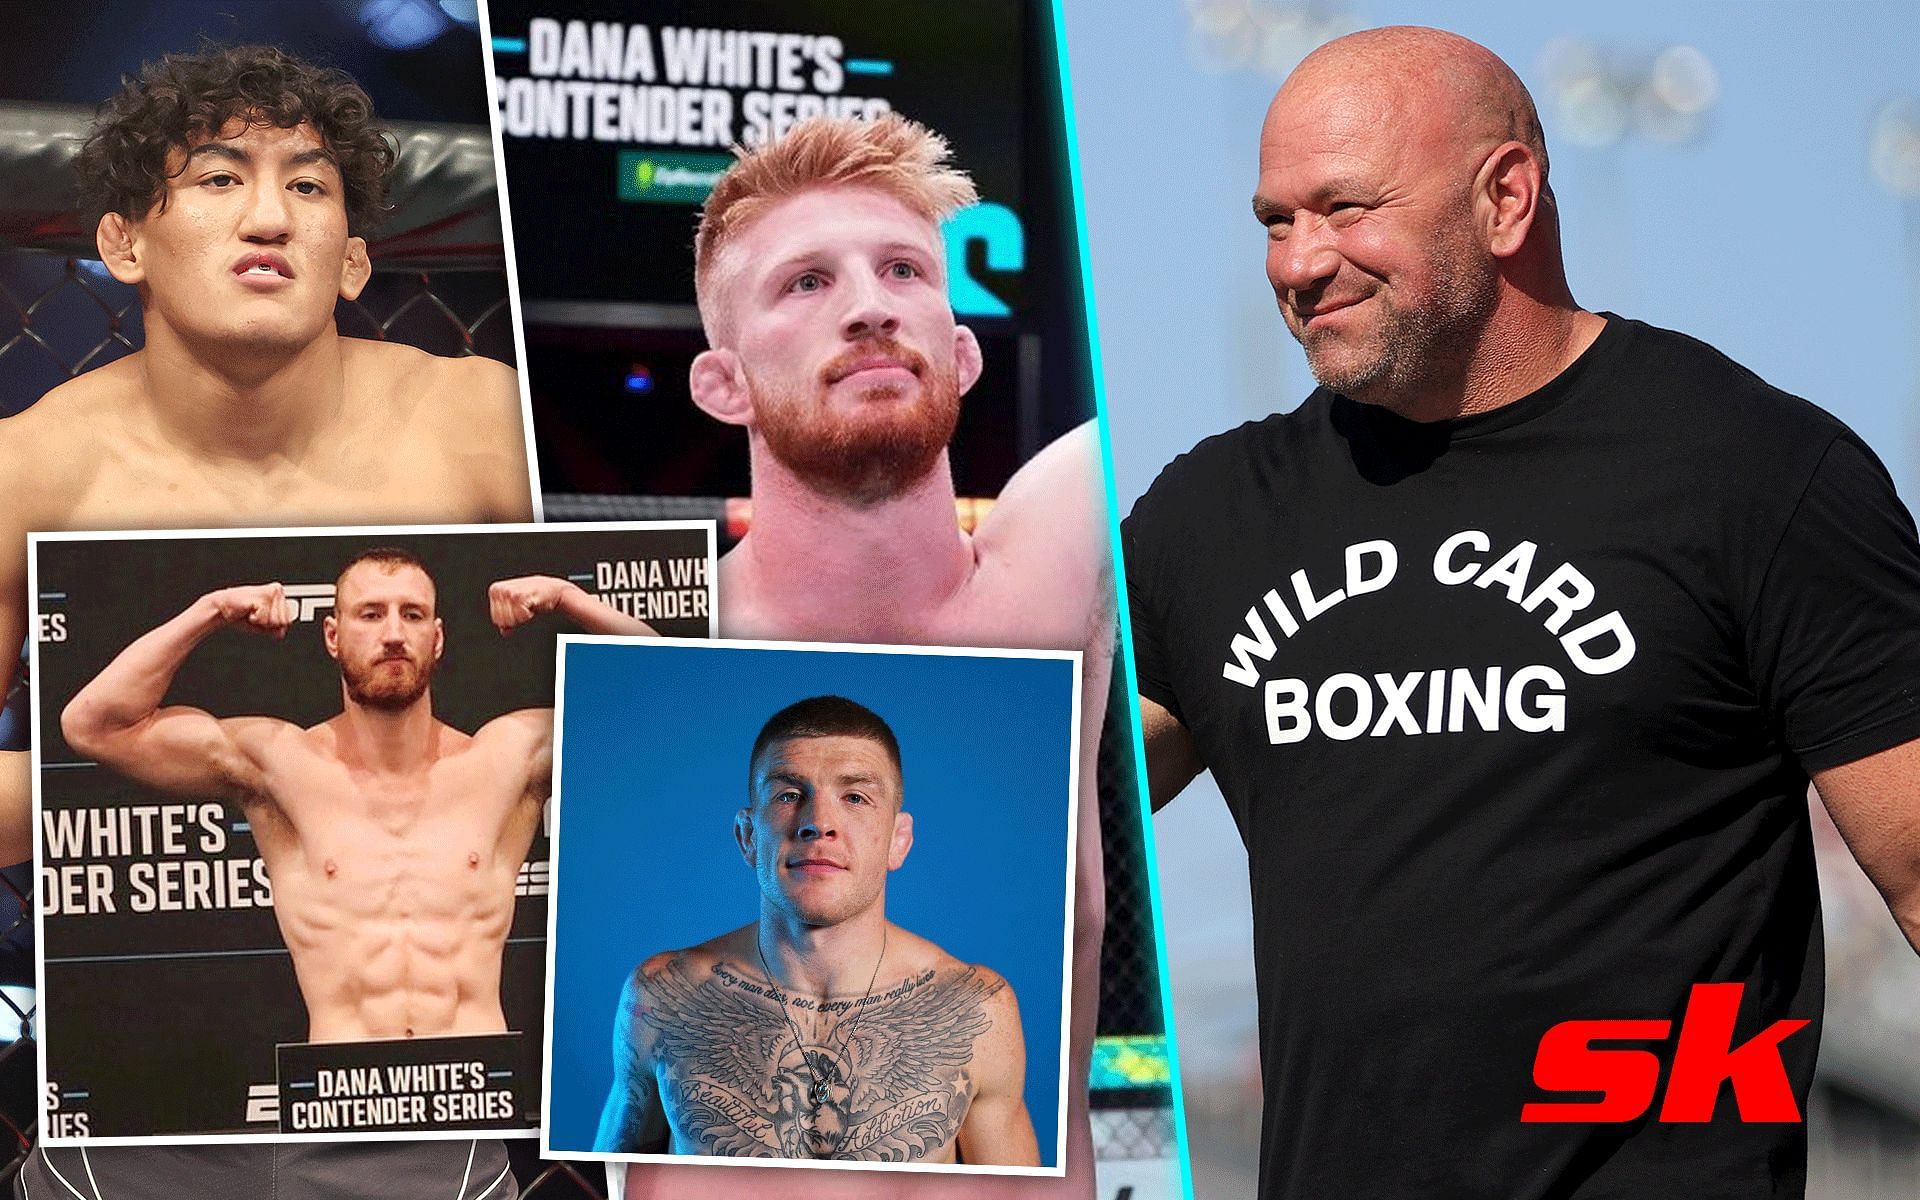 Raul Rosas Jr., Bo Nickal, Dana White, Joe Pyfer, and Chris Duncan (Image credits Getty Images and @the_problem155, @nobickal1, and @bodybagz_pyfer on Instagram)